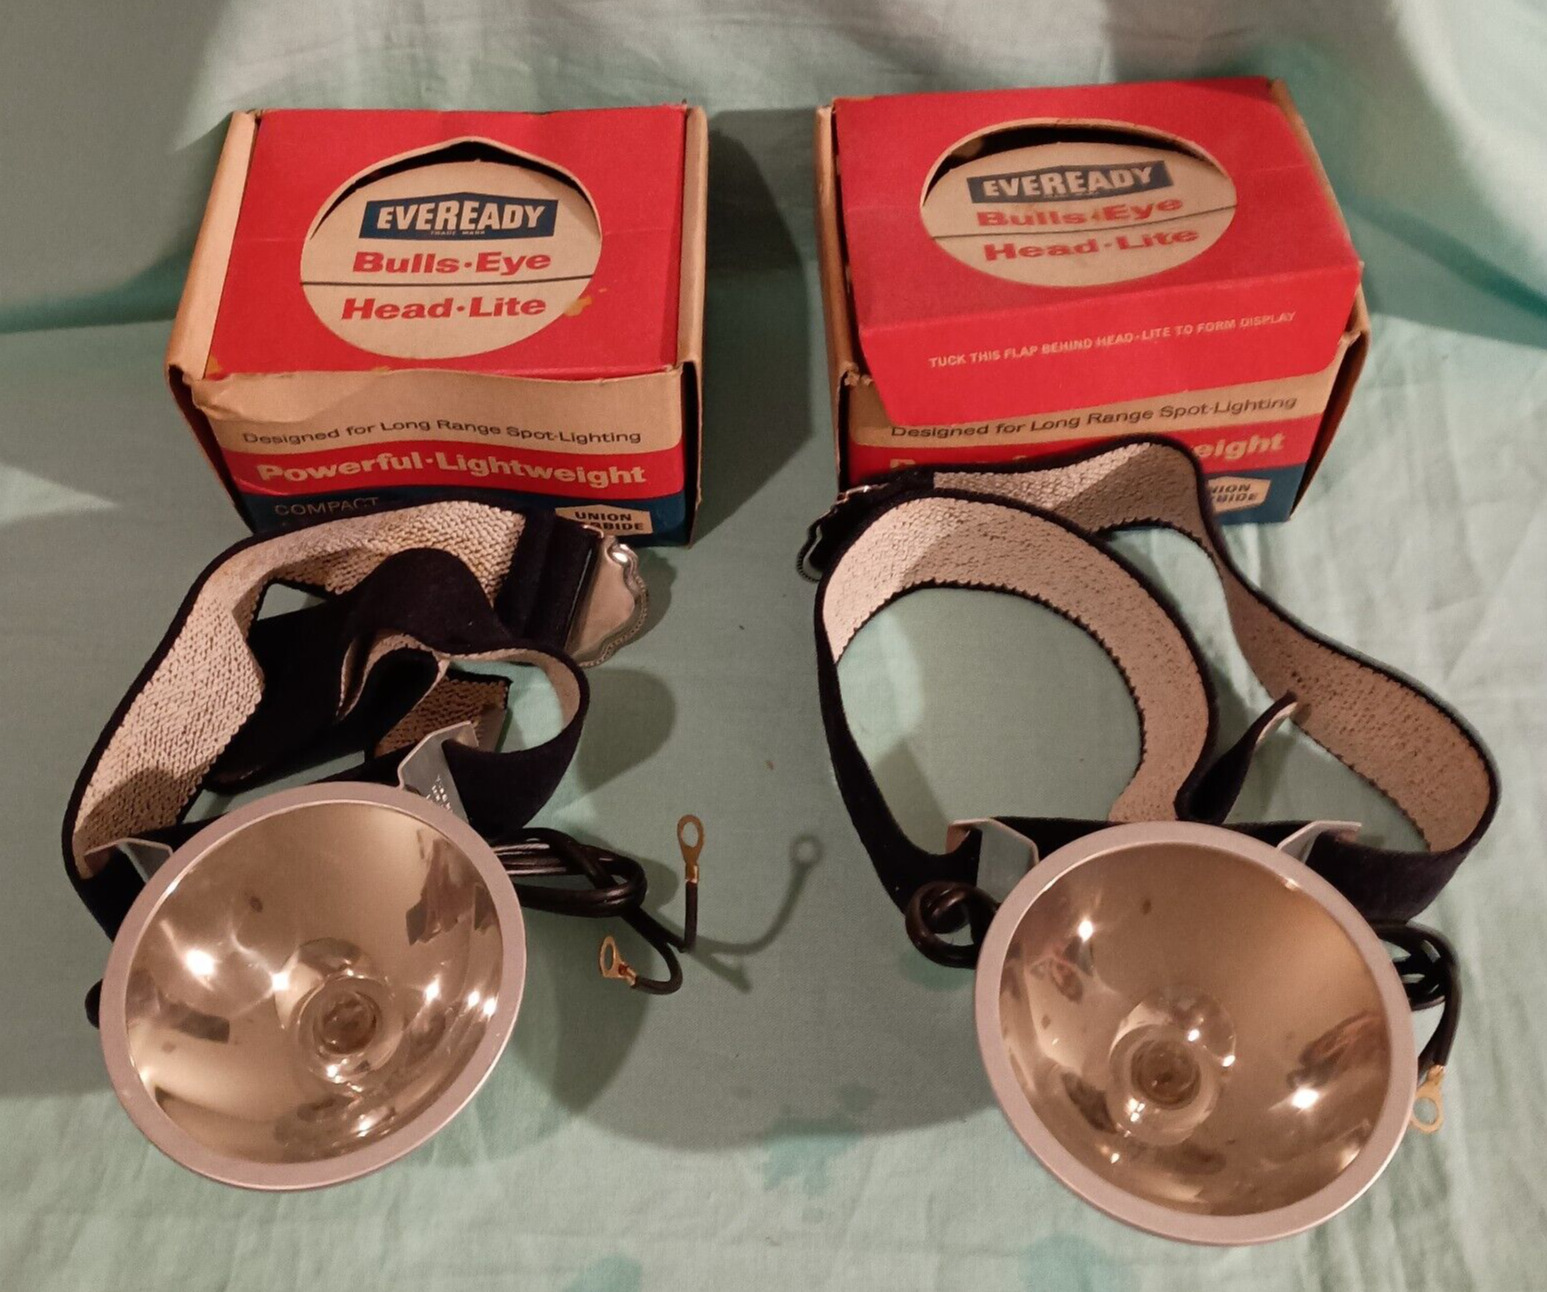 LOT OF 2 OLD EVEREADY BULLS EYE HEAD LITE FLASH LITE WITH ORIGINAL BOXES 